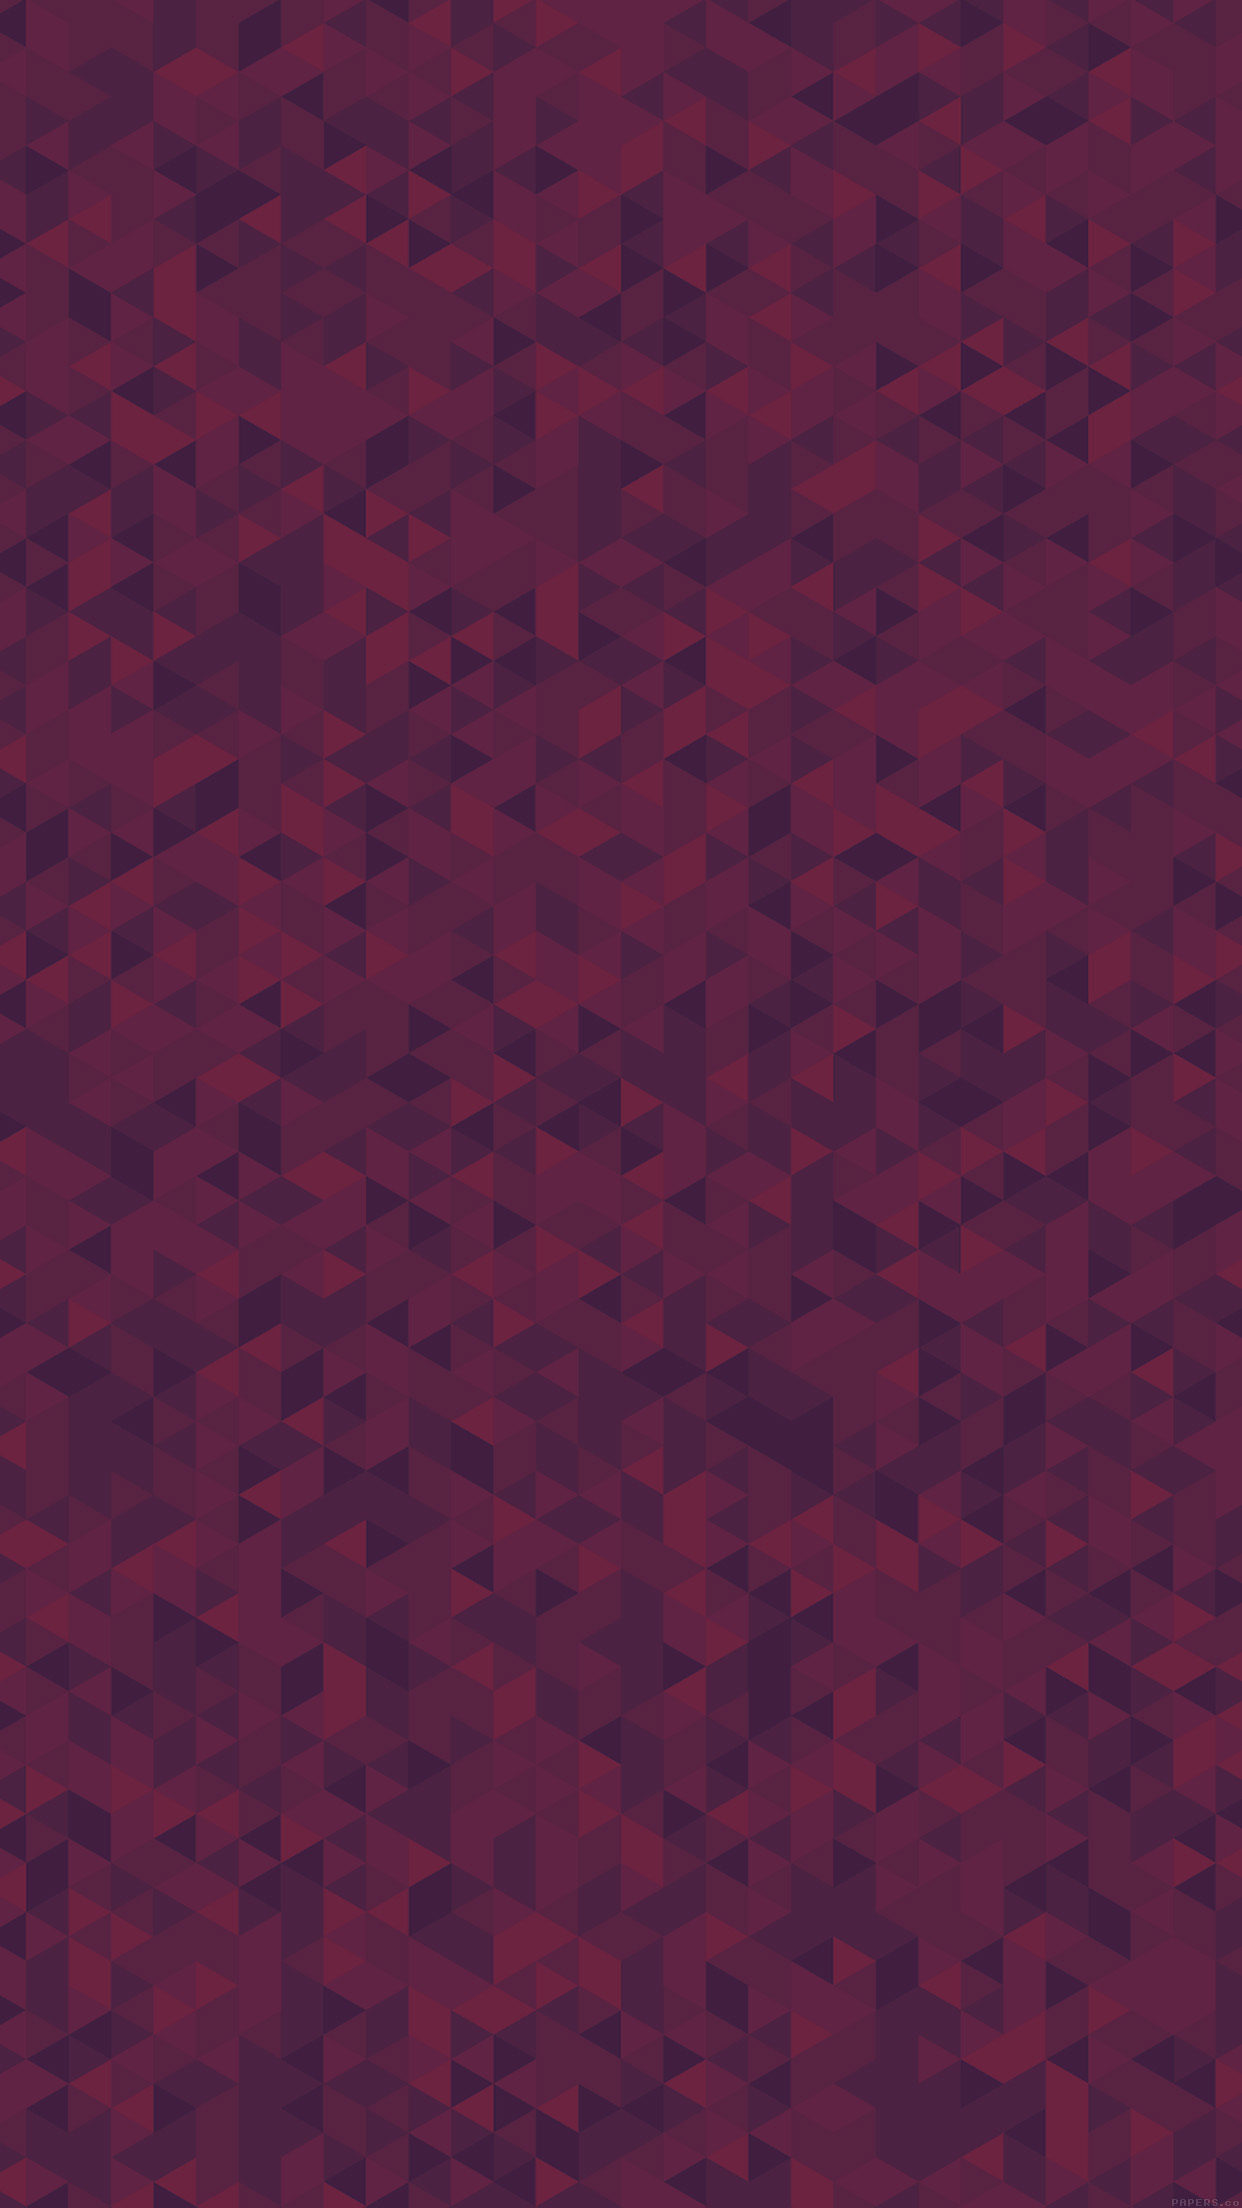 Diamonds Abstract Art Red Pattern Android wallpaper